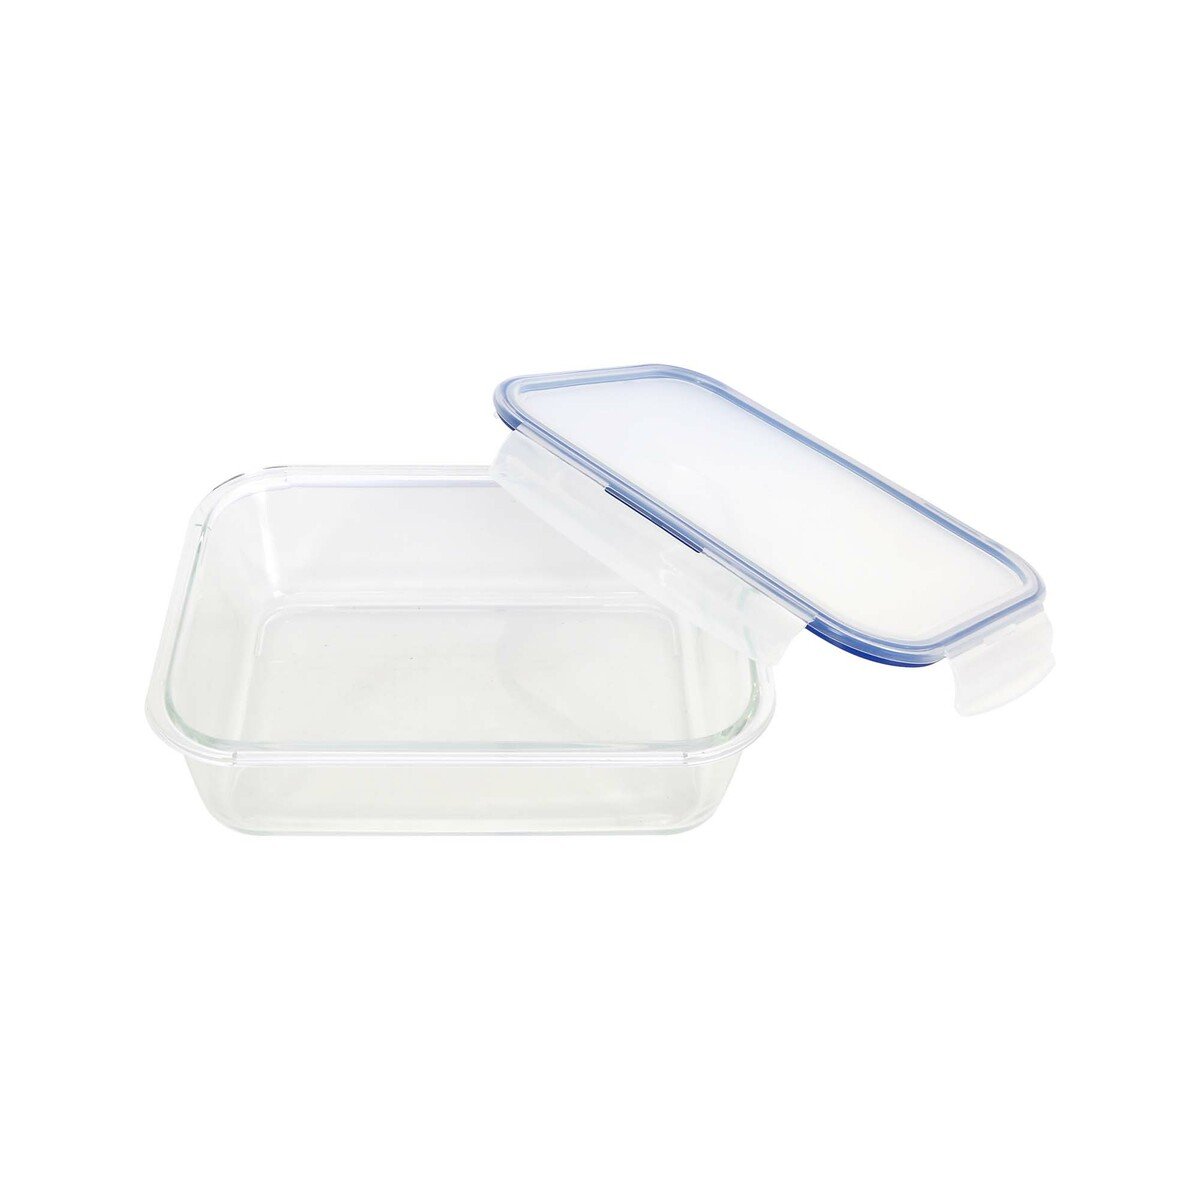 Chefline Rectangular Glass Container 122CL